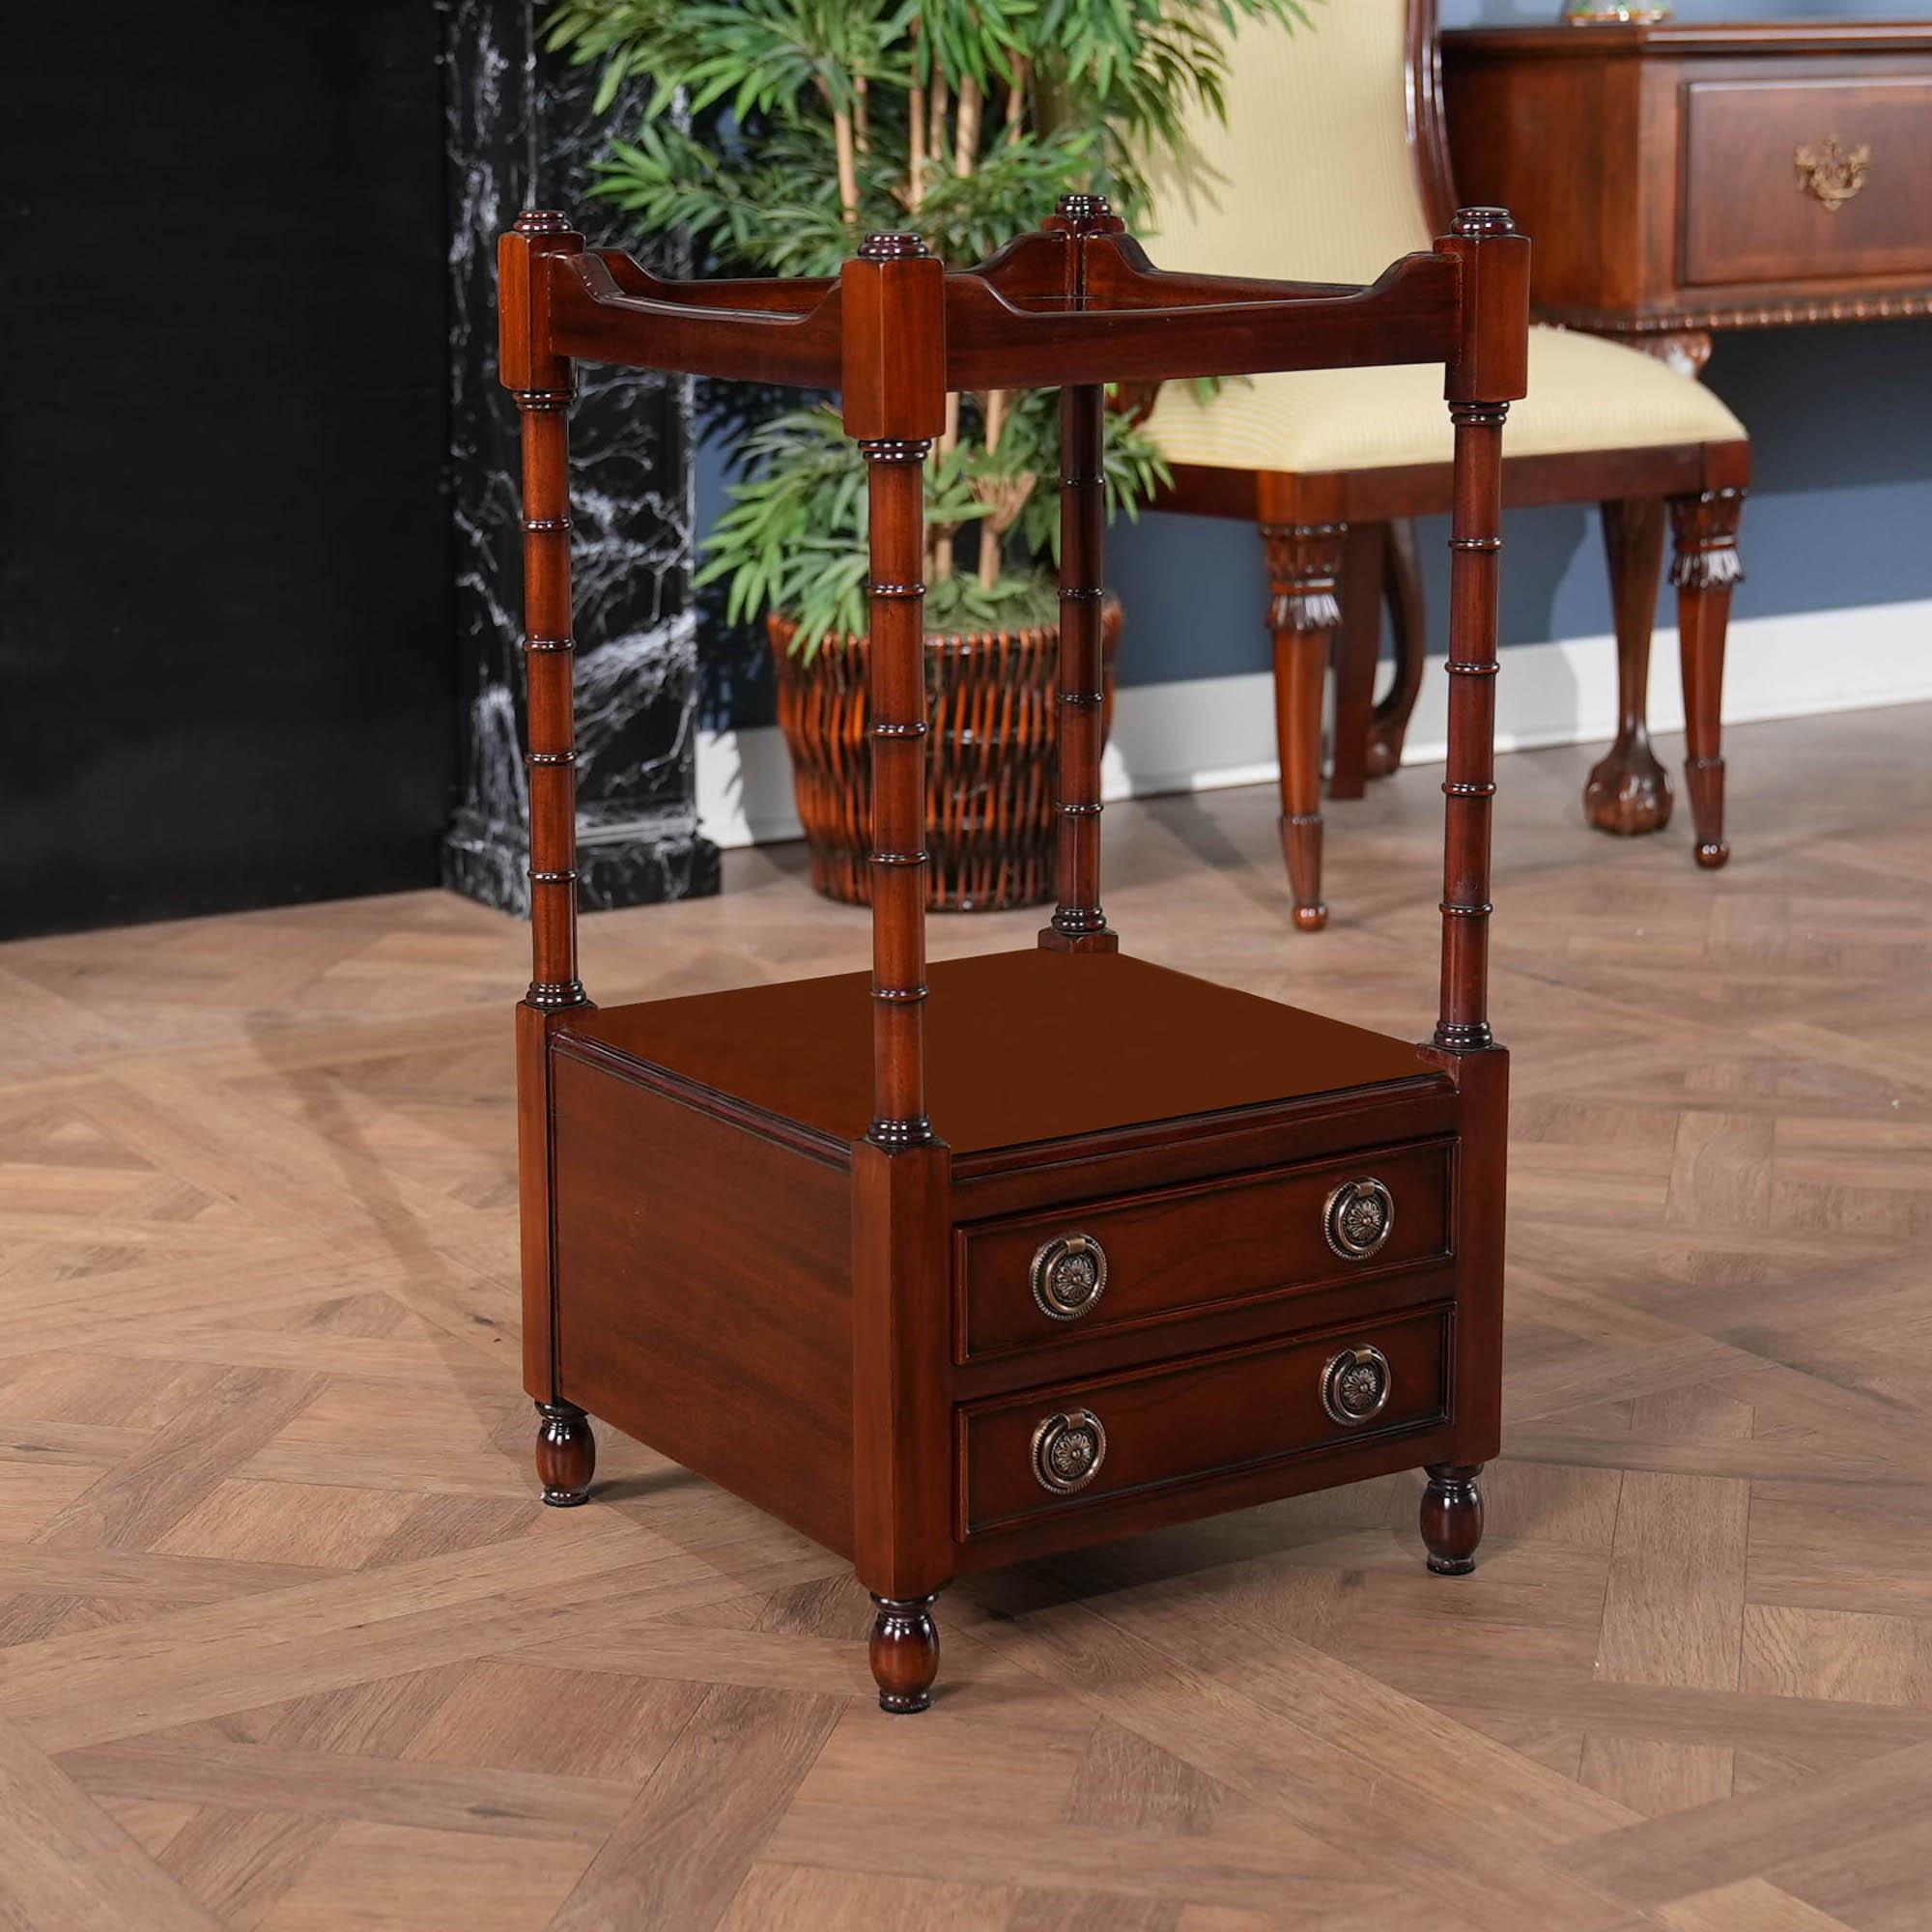 Popular for centuries this style of Mahogany Two Drawer Stand was first produced as an etagere which, once broken or damaged, would have been cut down to make an end table. They were in such high demand that cabinet makers began producing them as